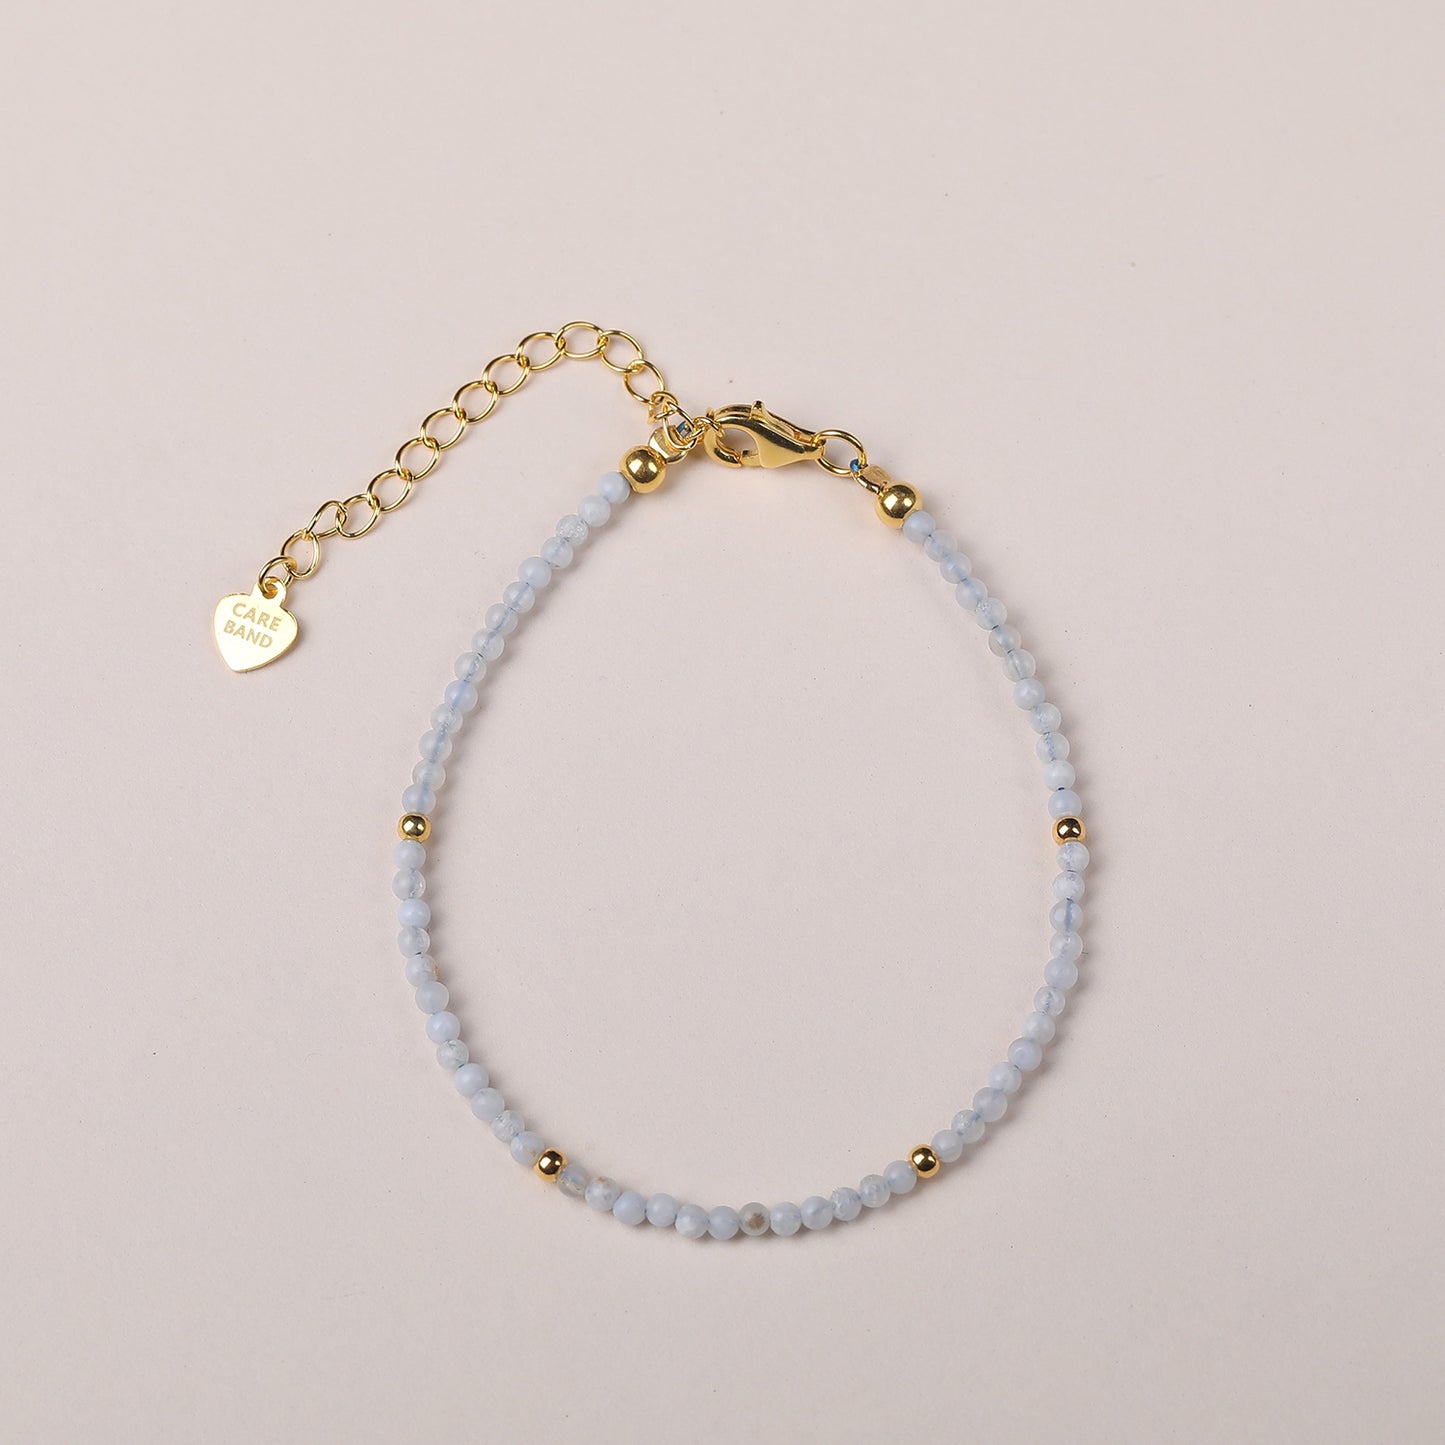 Care Band Blue Lace Agate Round Bracelet